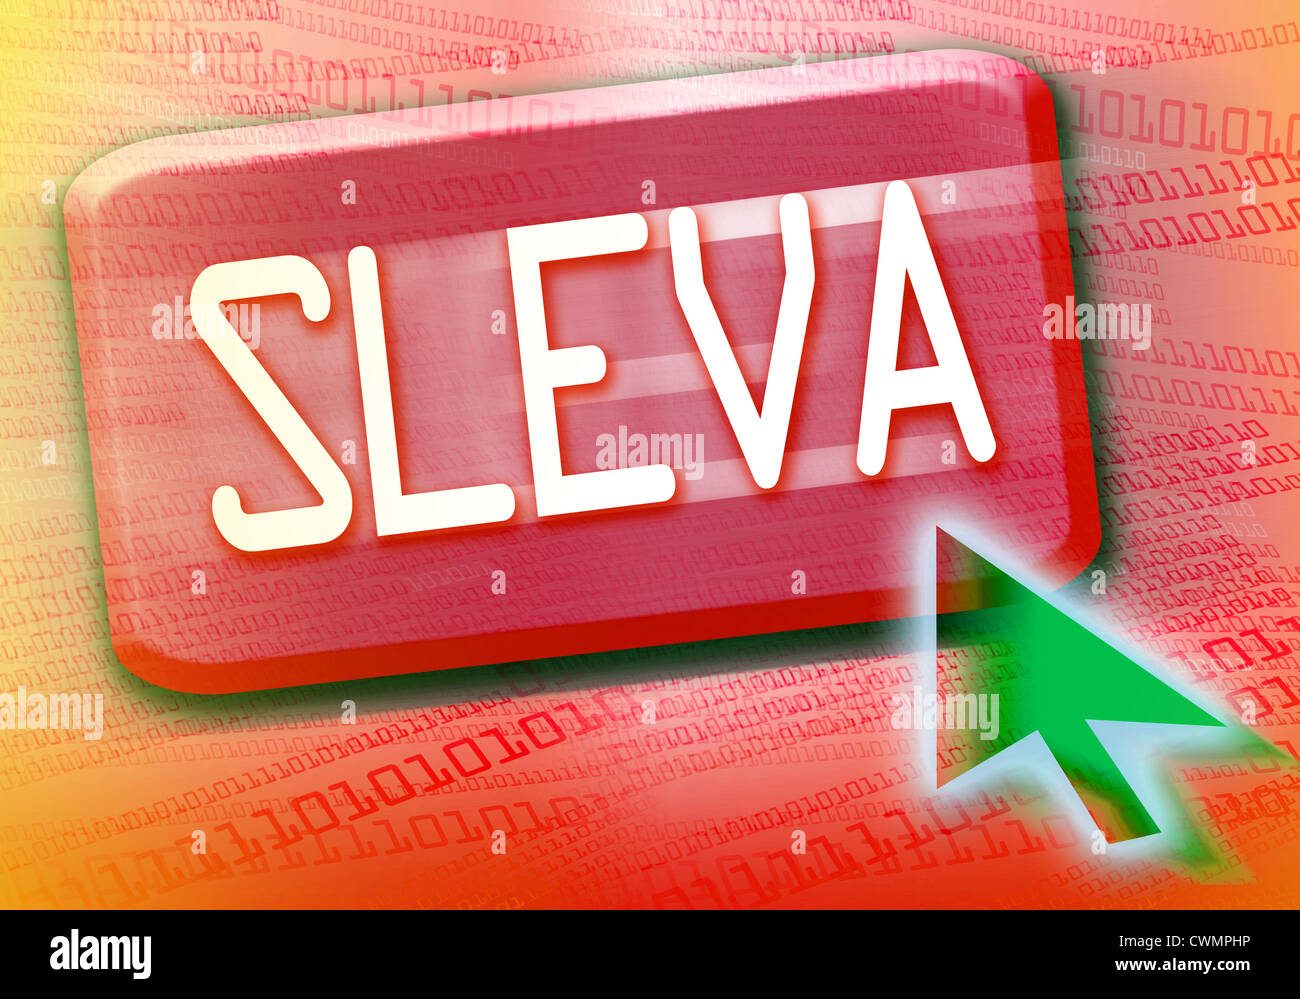 Sleva  - on-line shopping - Czech business and commerce Stock Photo